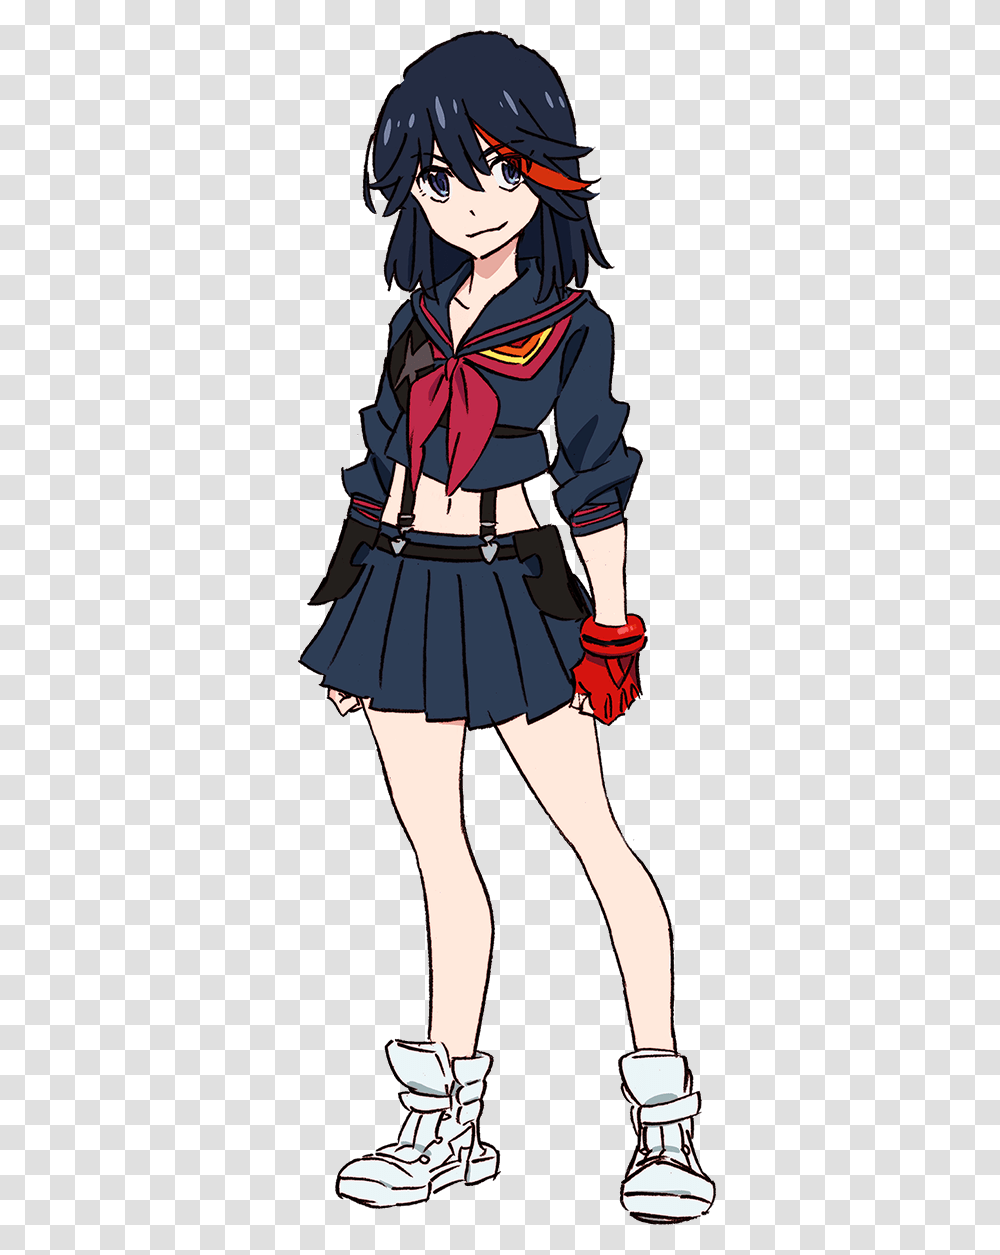 What Are Some Female Anime Characters With Short Black Hair Kill La Kill Matoi Ryuko, Skirt, Clothing, Apparel, Costume Transparent Png